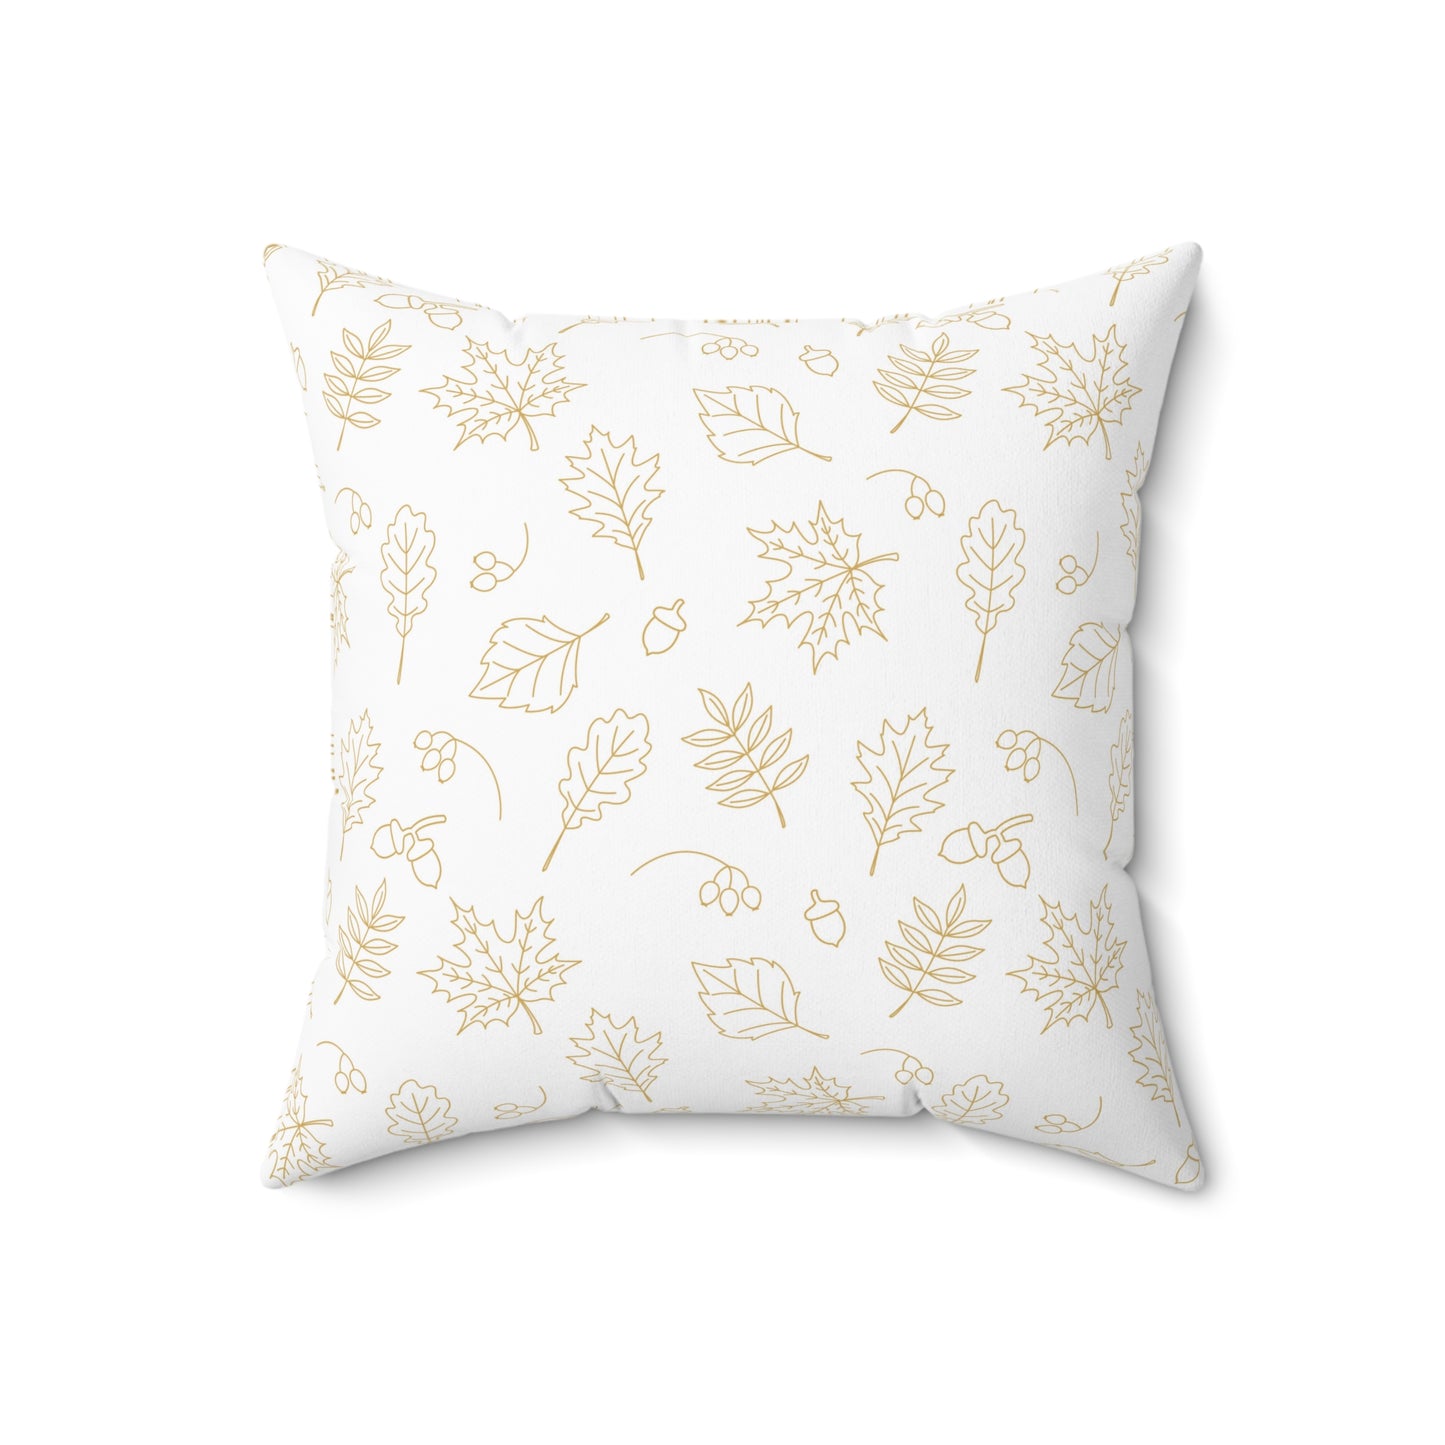 Acorns and Leaves Spun Polyester Square Pillow